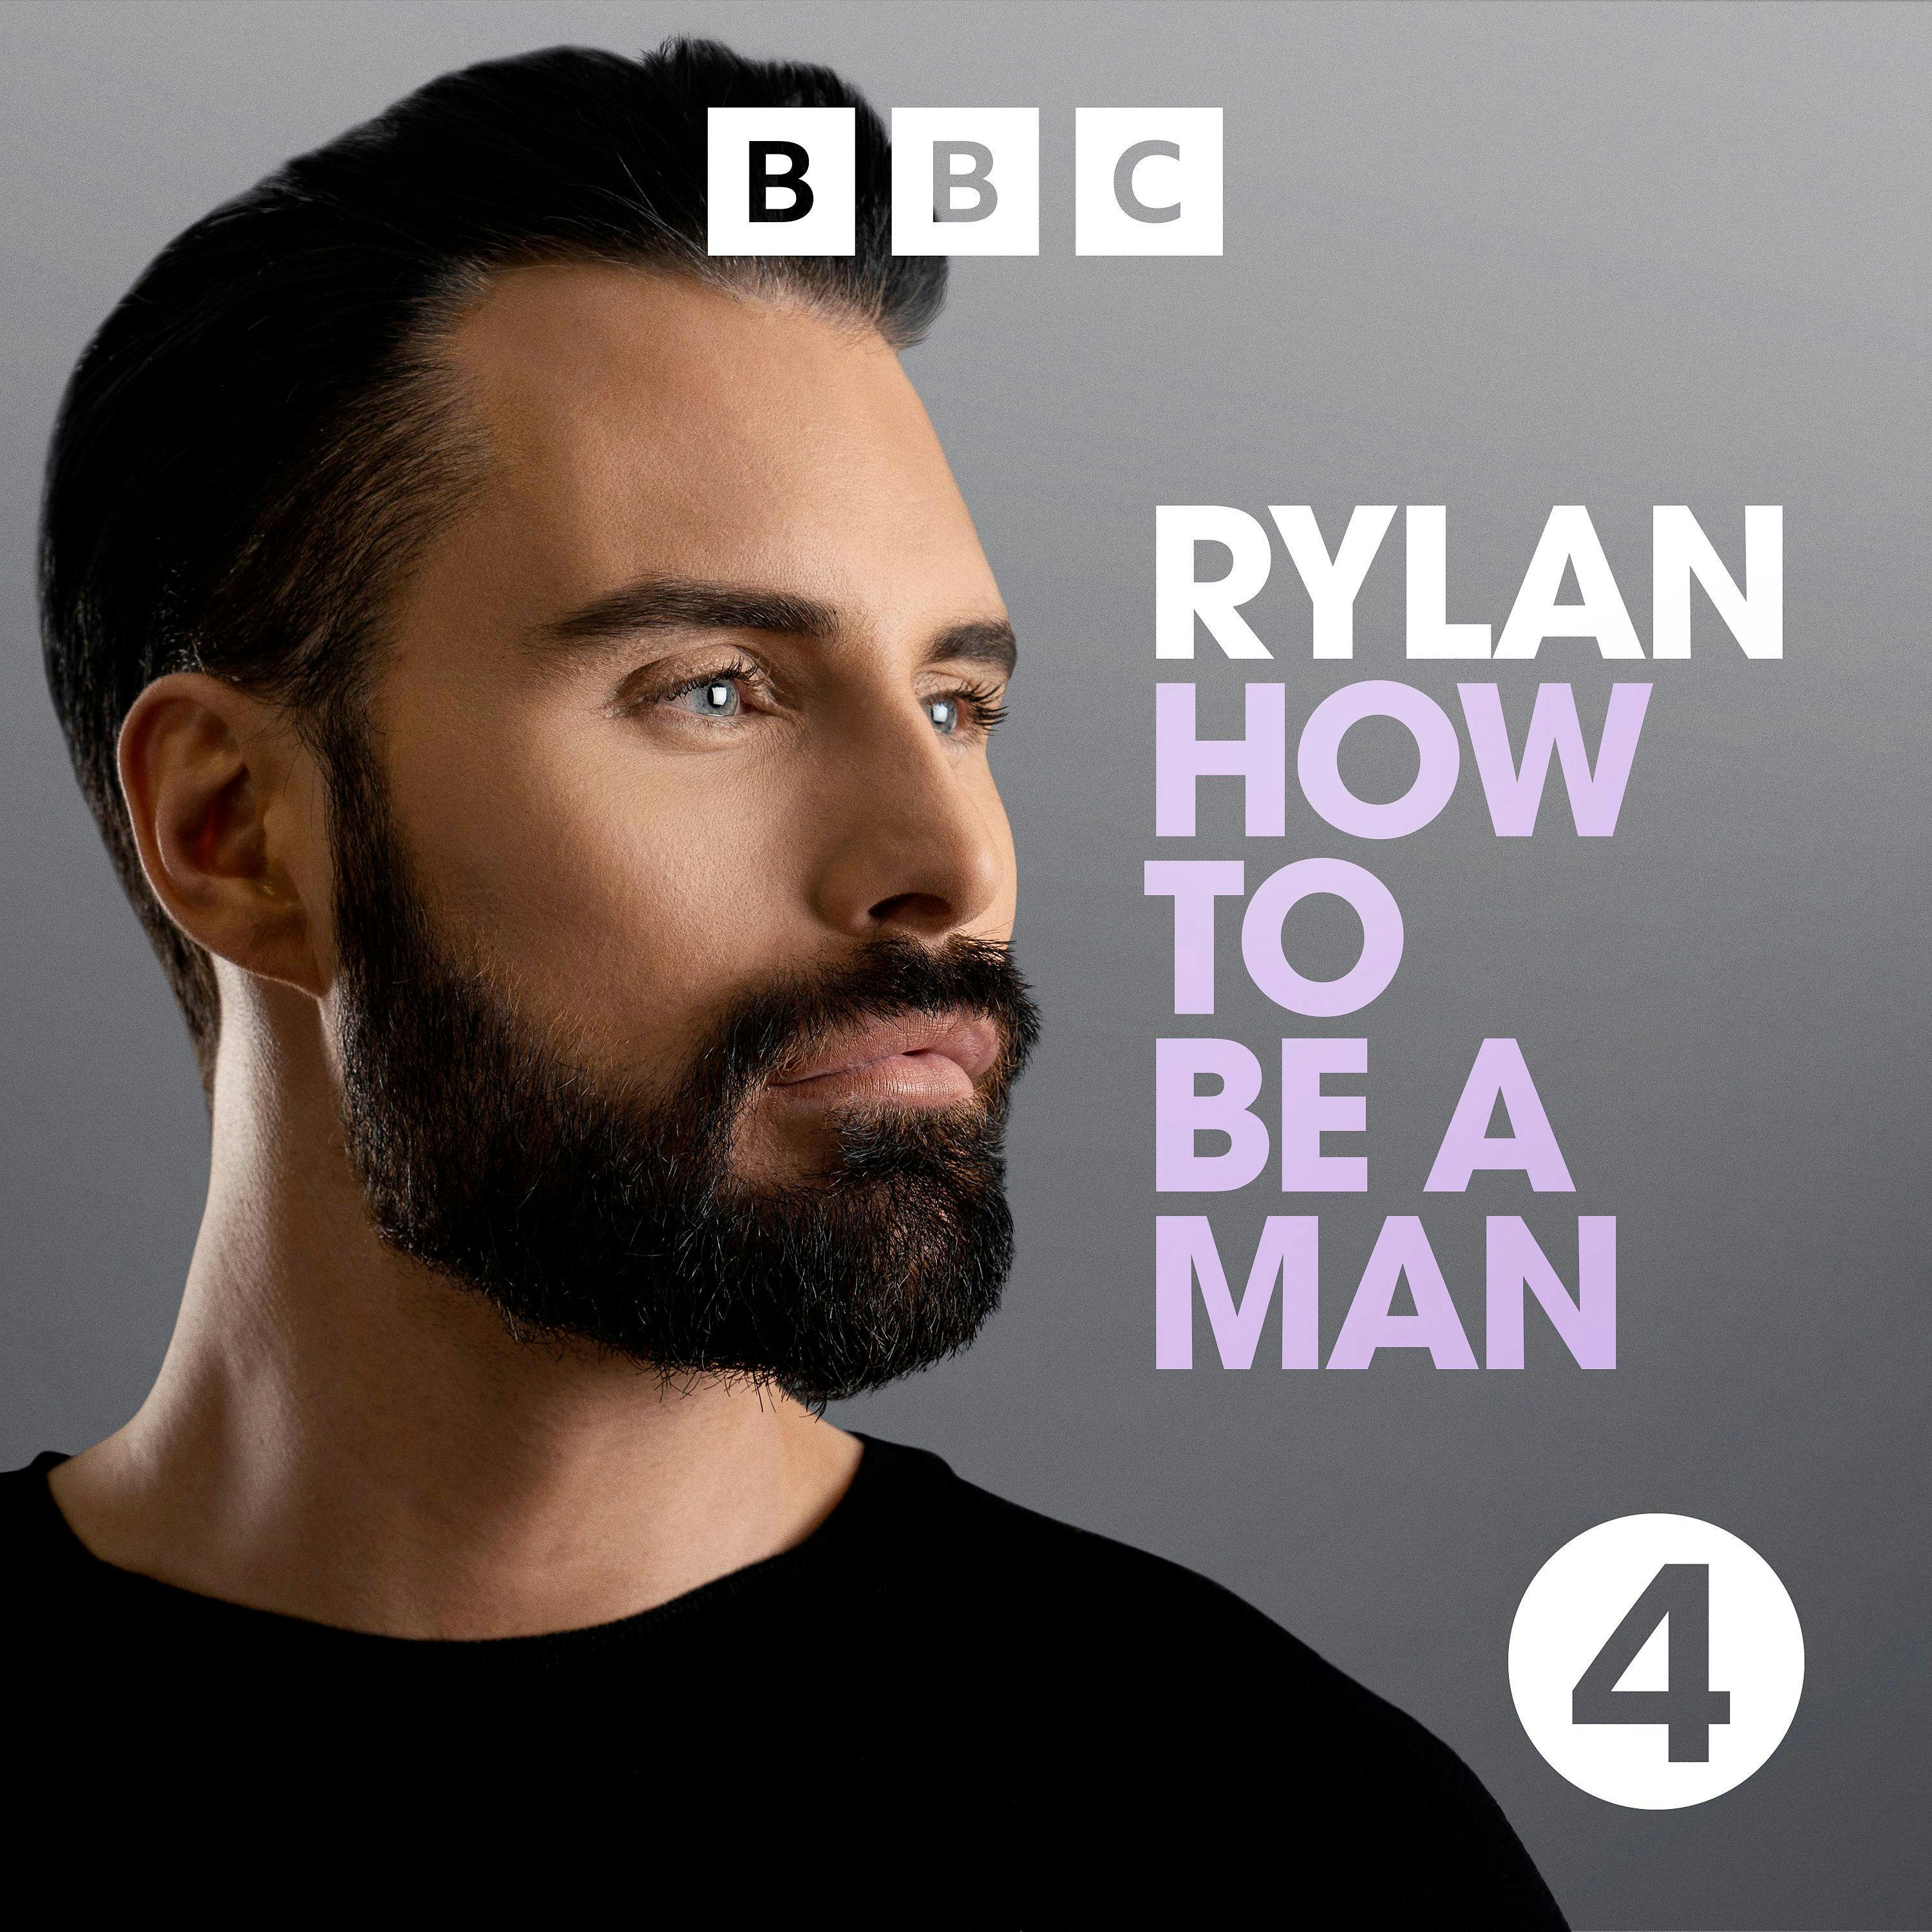 Rylan: How to Be a Man